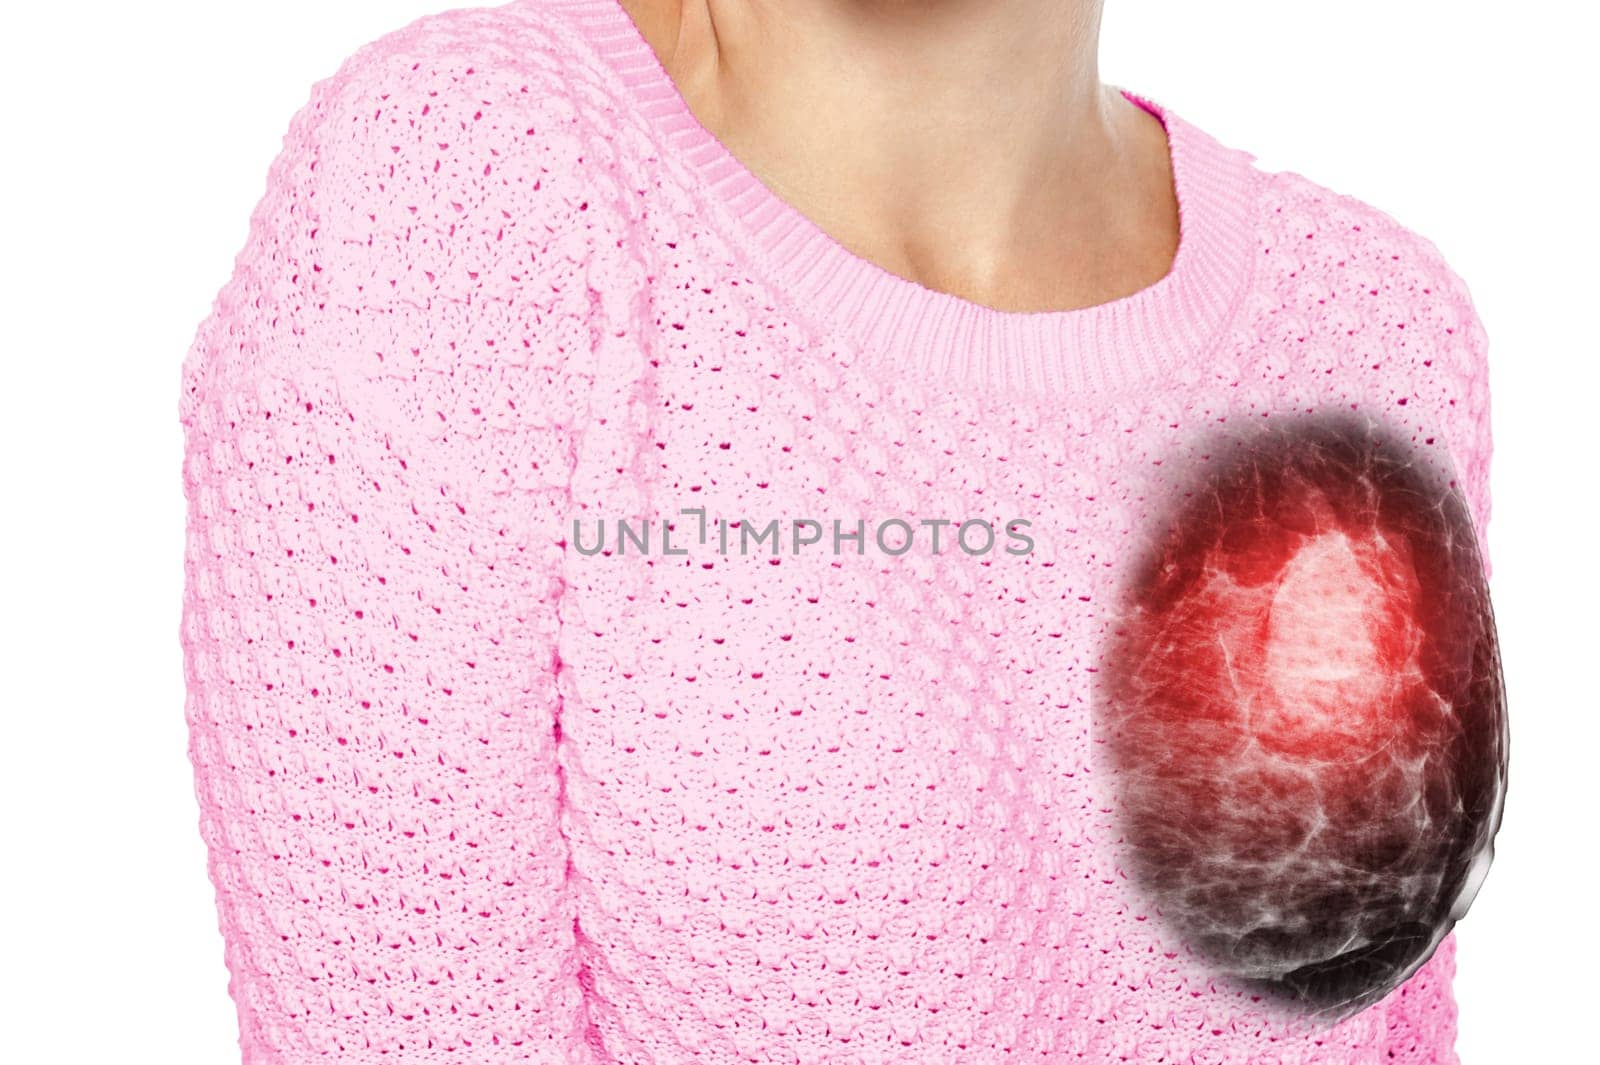 Mammogram image on the Left side chest of woman. by samunella